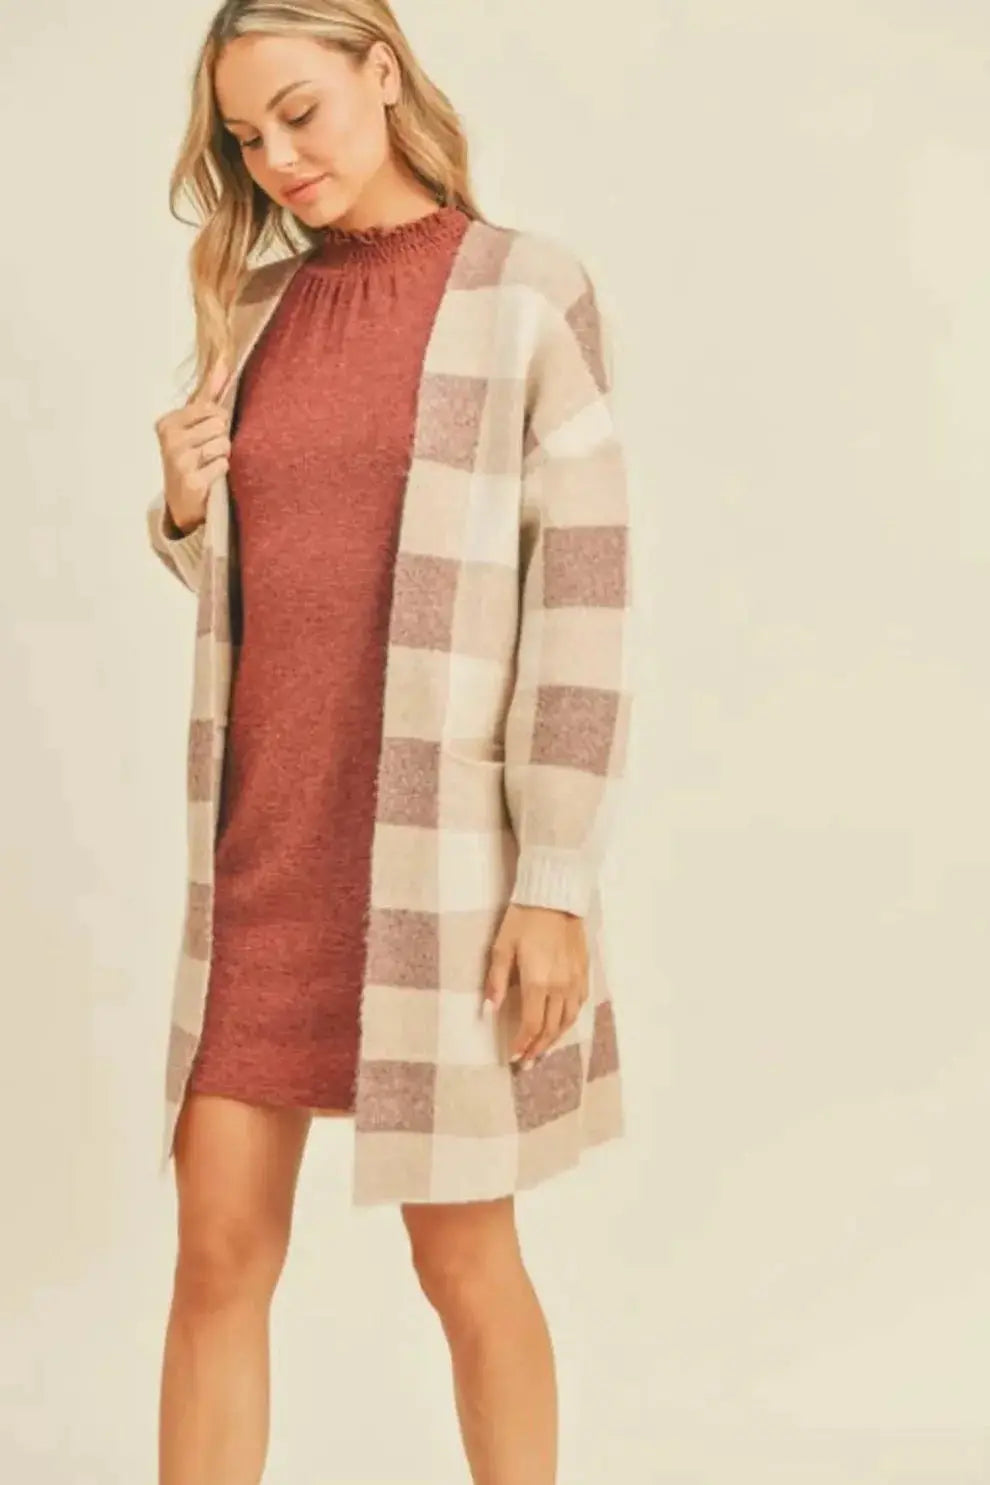 A woman modeling a ginger and cream plaid open cardigan